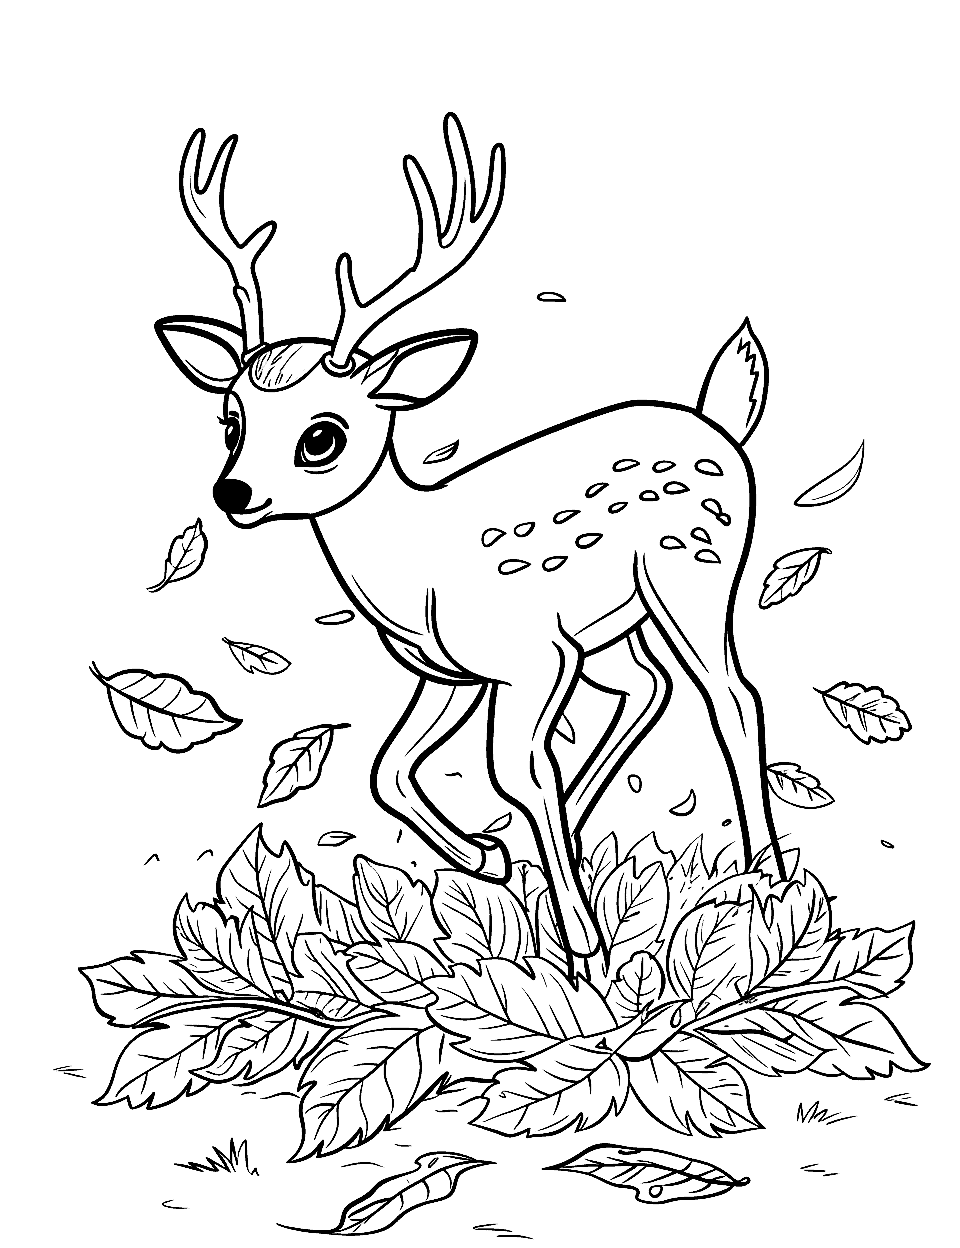 Fawn Playing in Autumn Leaves Coloring Page - A playful fawn jumping through piles of colorful fall leaves.